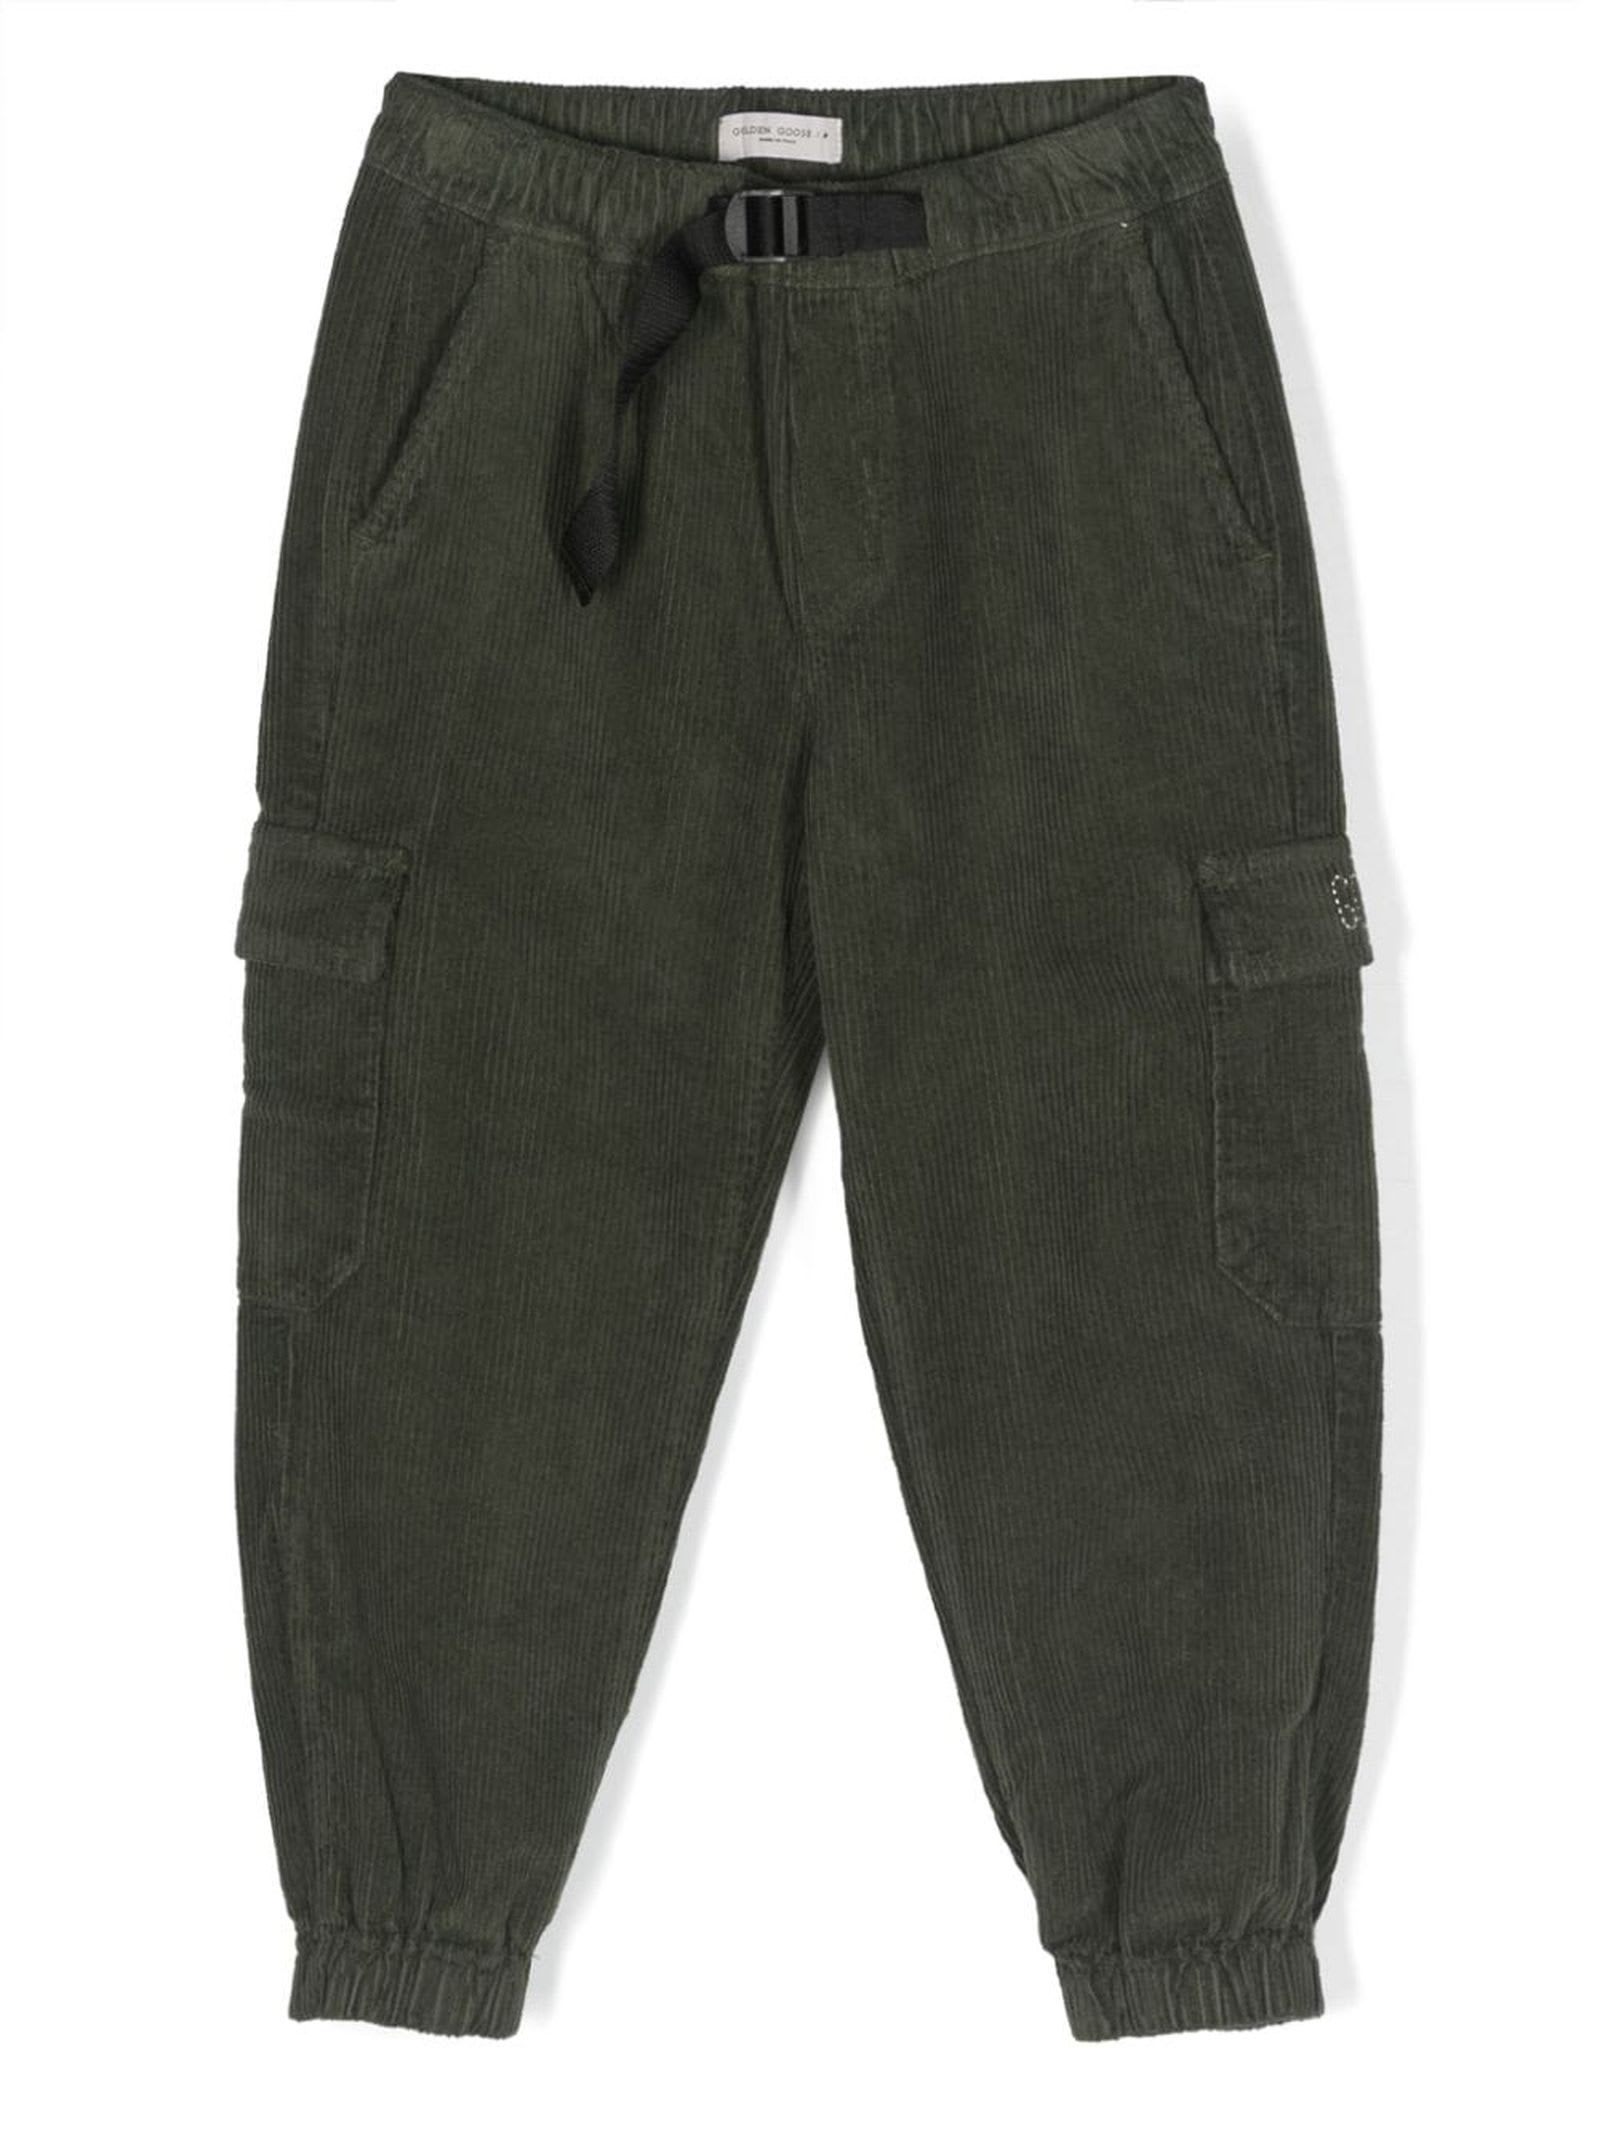 GOLDEN GOOSE GREEN COTTON TROUSERS